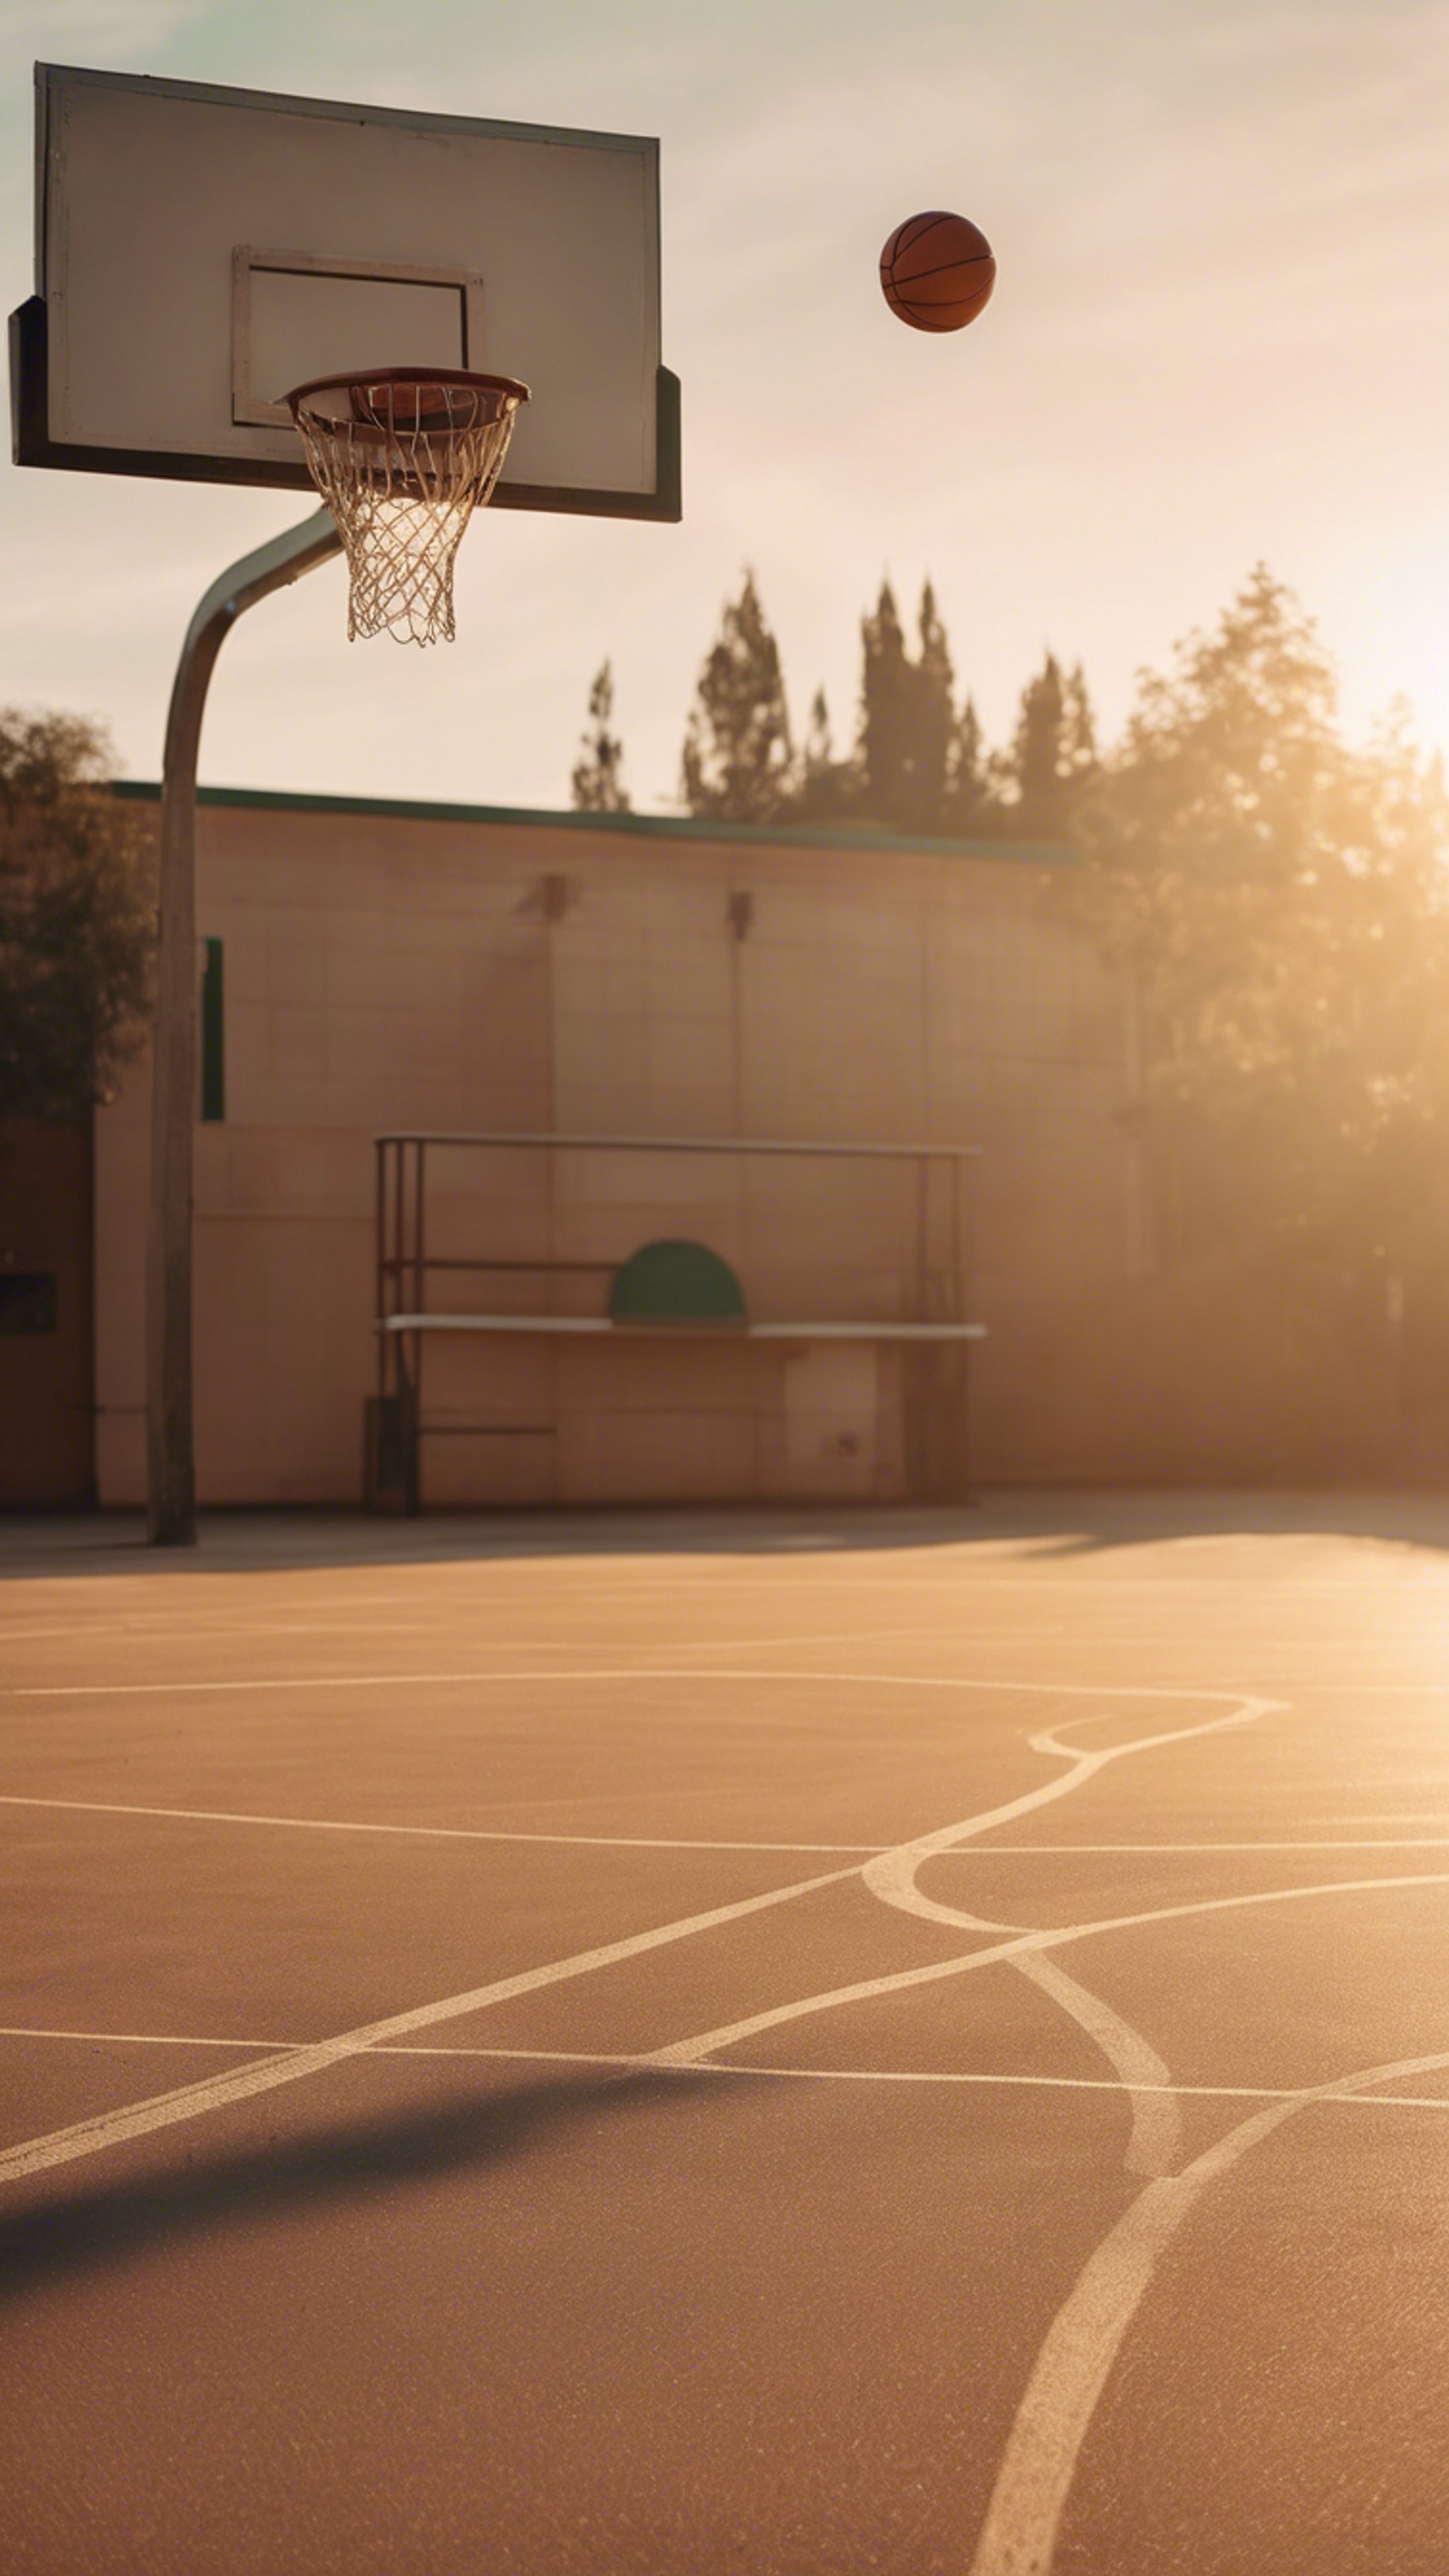 A deserted school’s basketball court in the pacific golden light of sunset. 墙纸[5d35315ab9de41dcbc38]